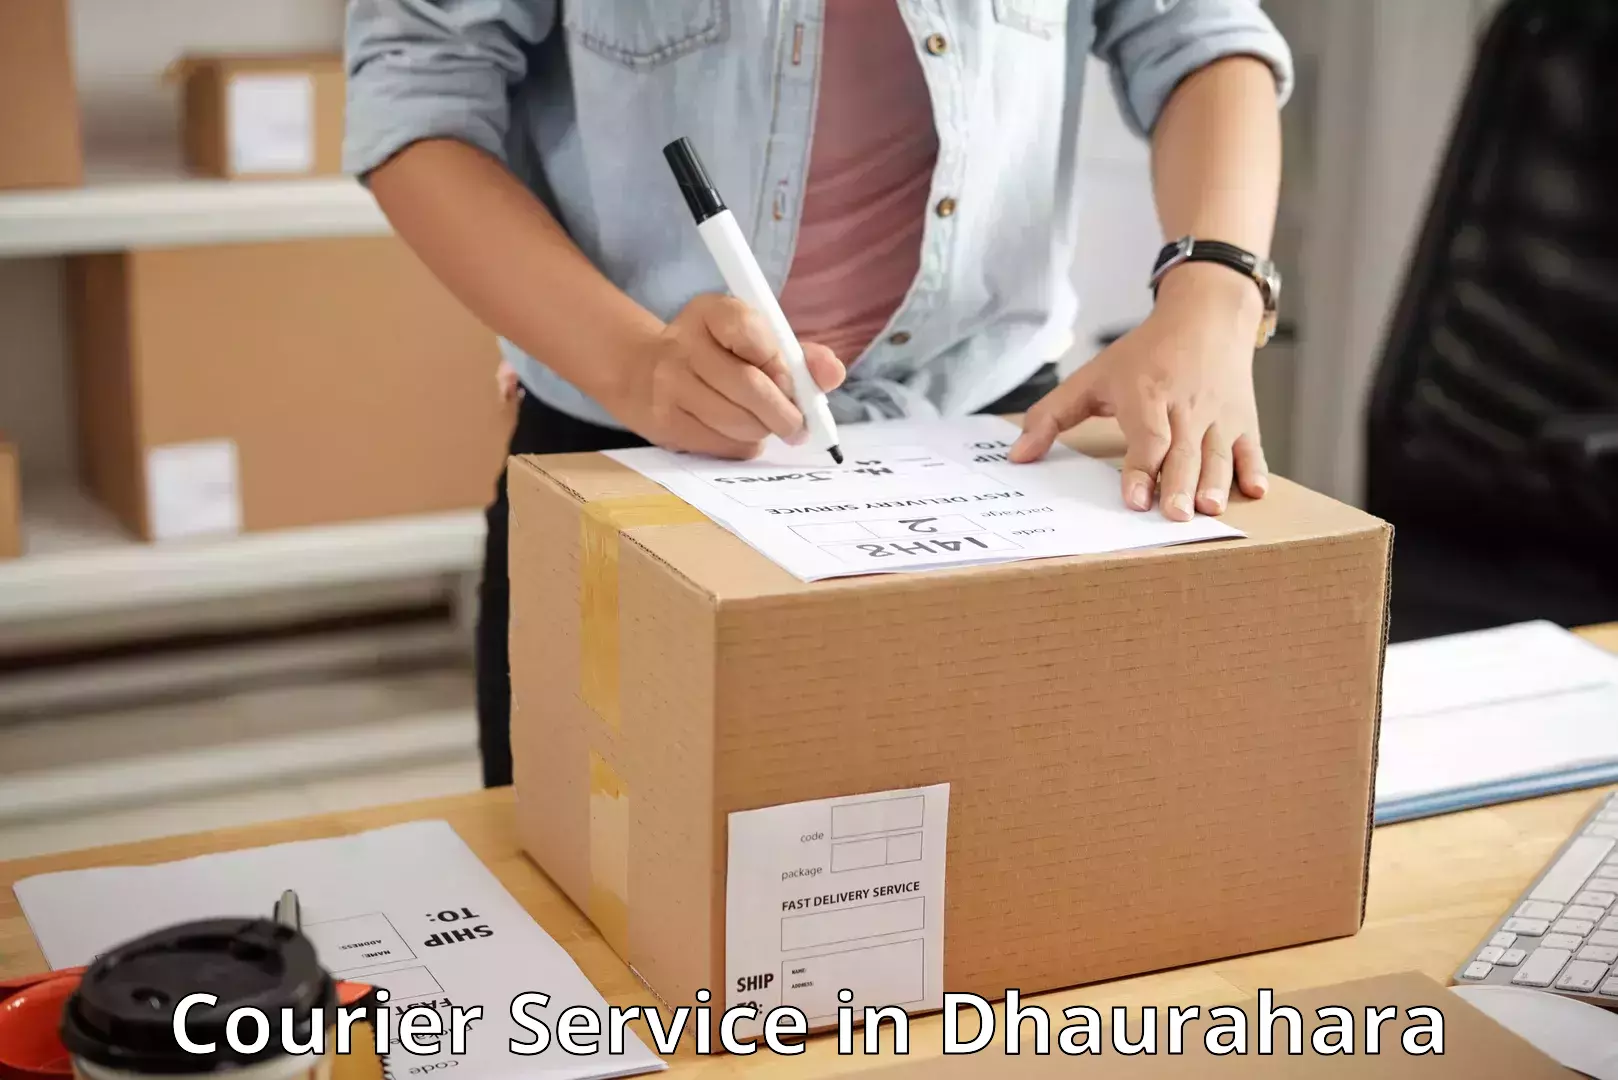 Express package services in Dhaurahara